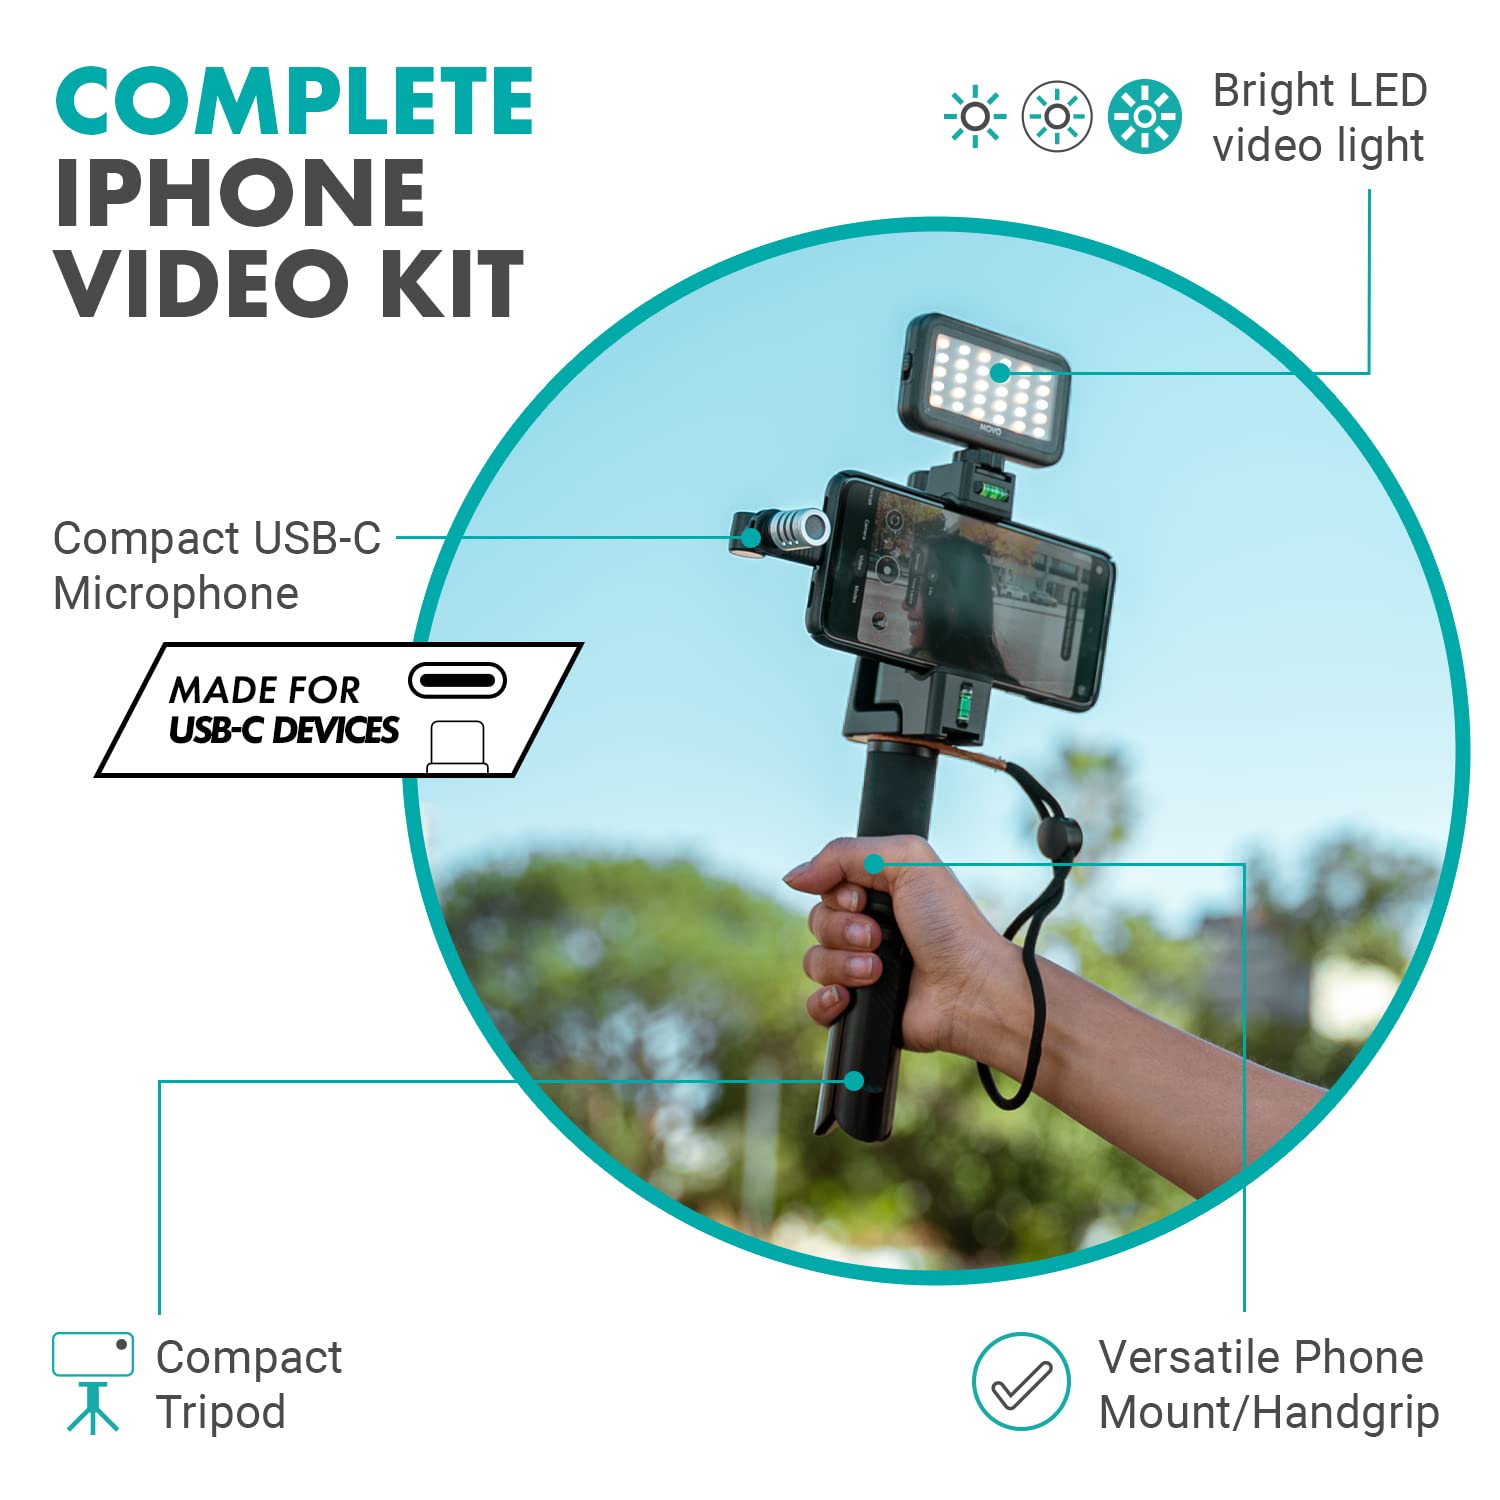 Movo uVlogSK Starter Kit for Content Creators - Smartphone Video Vlogging Kit for Android and USB-C Devices - Includes USB-C Microphone, LED Video Light, Phone Holder, Grip, and Mini Tripod  - Acceptable